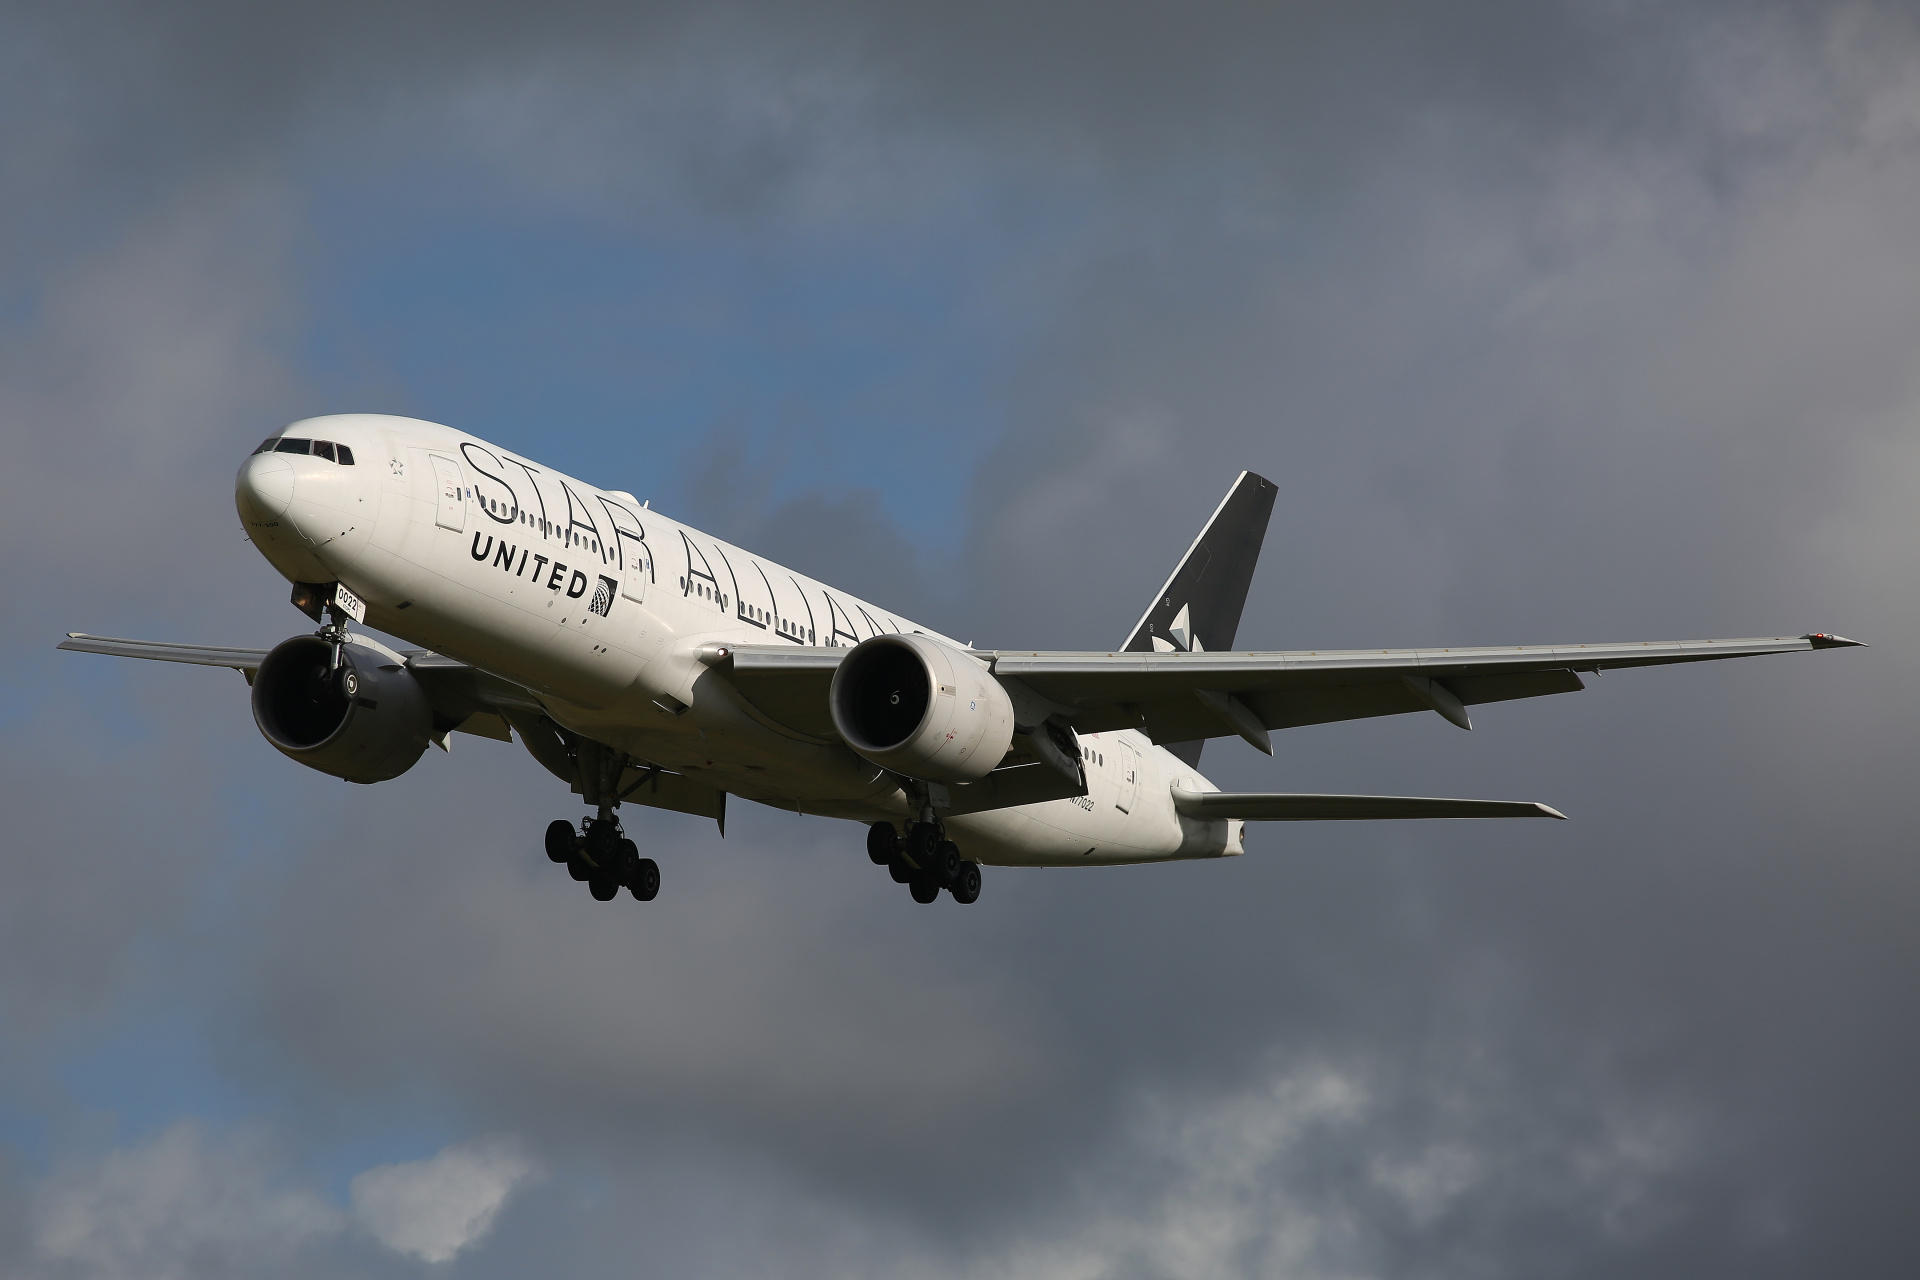 N77022 (Star Alliance livery) (Aircraft » Schiphol Spotting » Boeing 777-200/-ER » United Airlines)